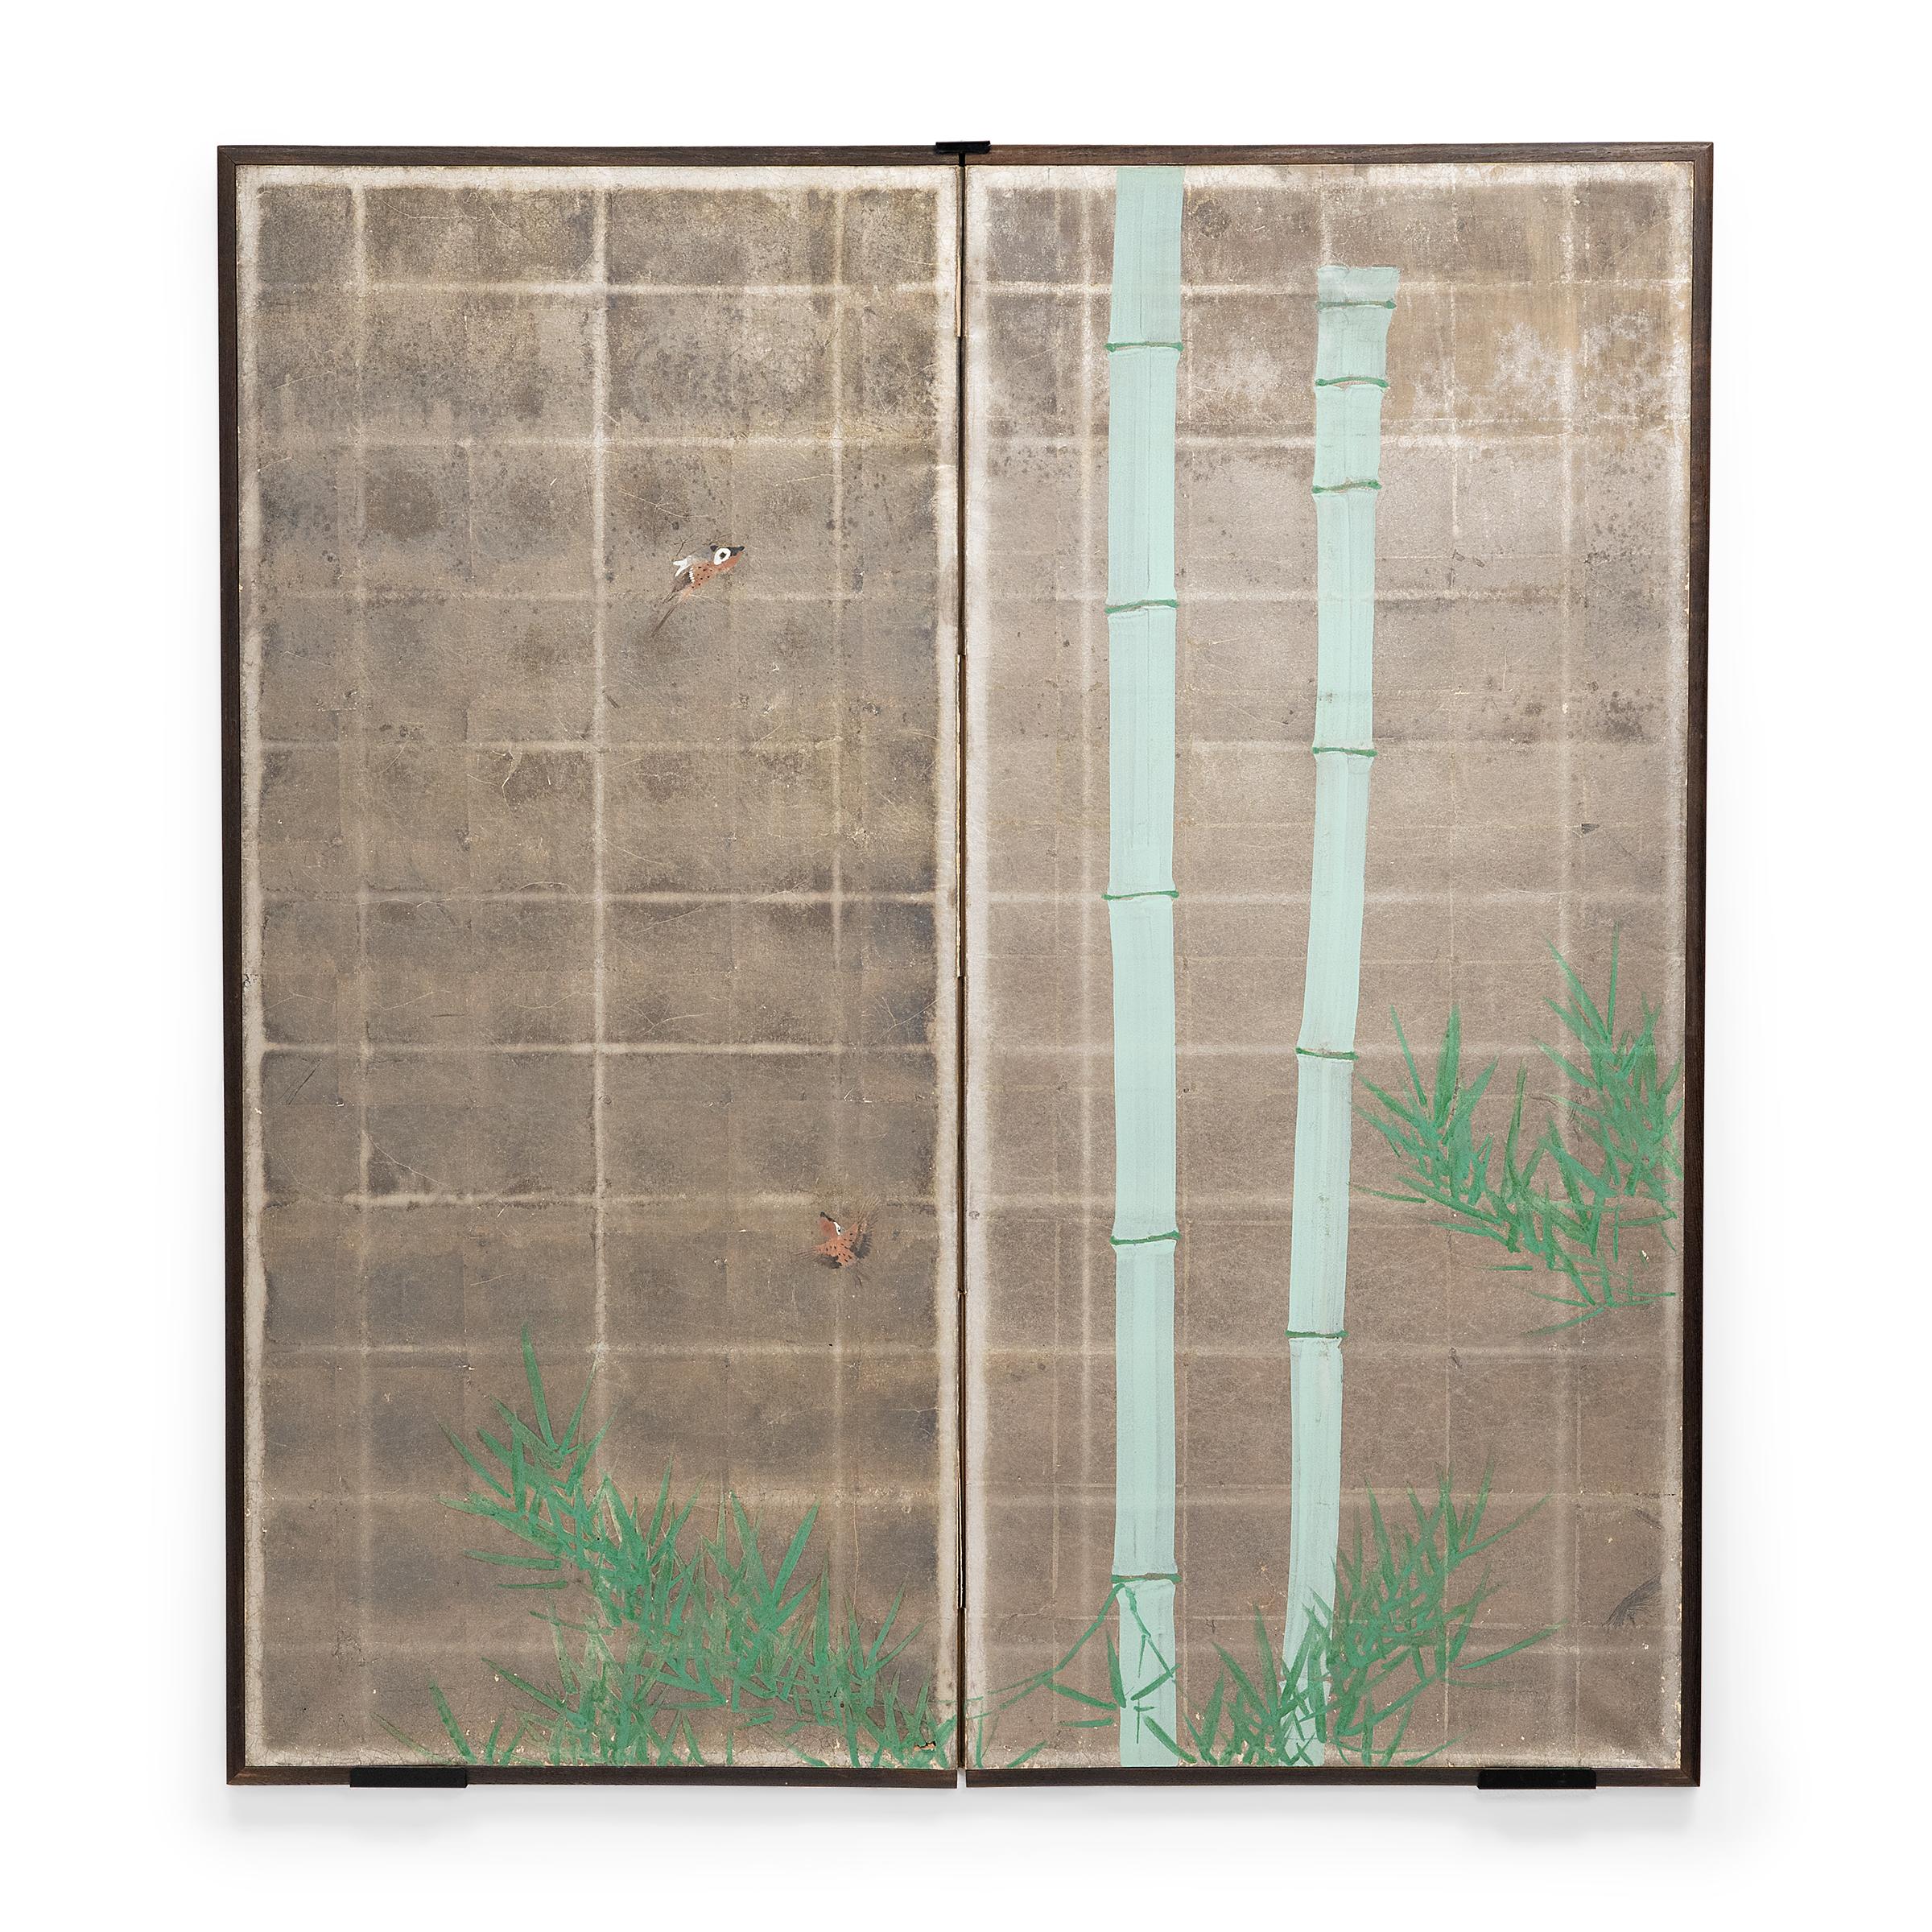 Unknown Still-Life Print - Japanese Silver Leaf Byobu Screen with Bamboo and Finches, c. 1800